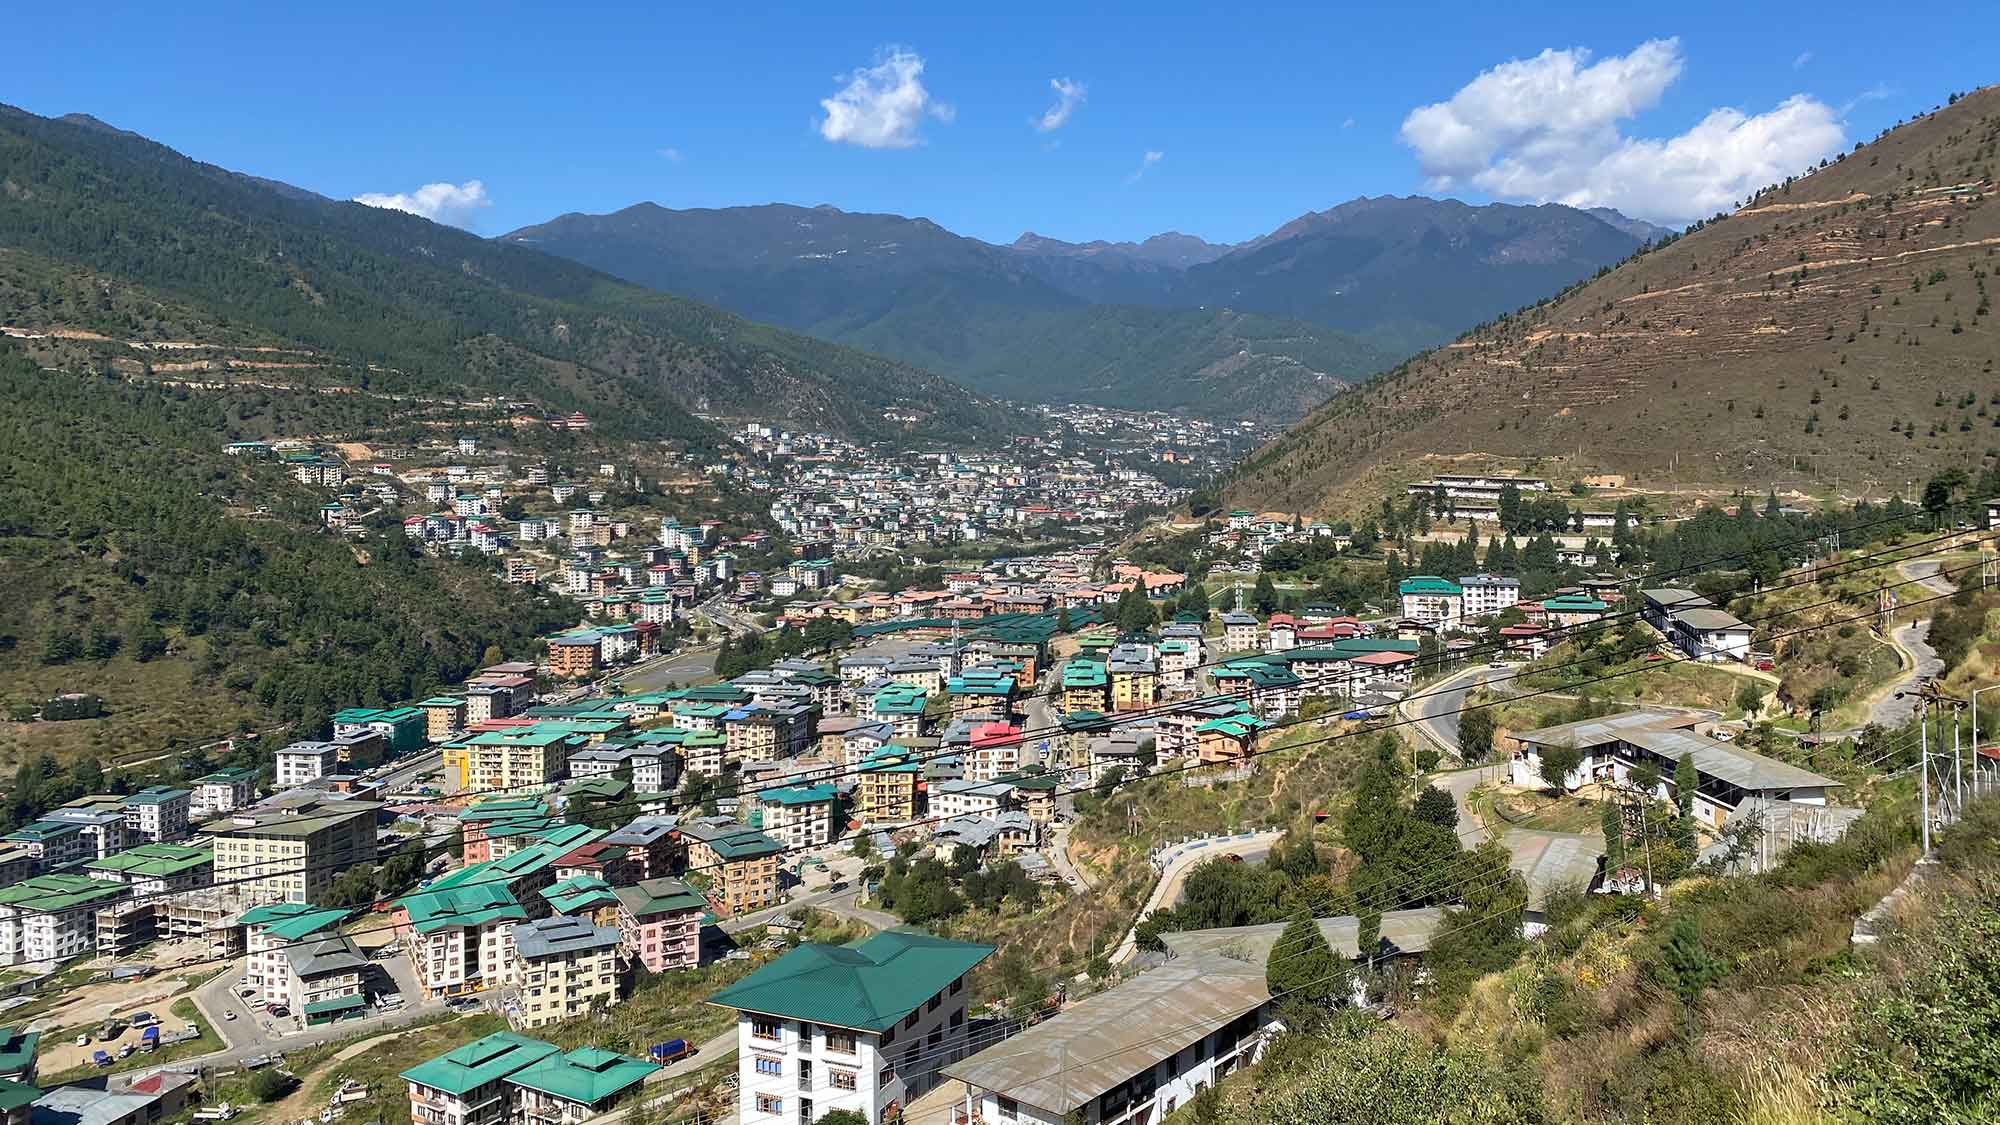 Photo of Thimphu showing buildings with multi-coloured roofs in the foreground and the mountains in the background.